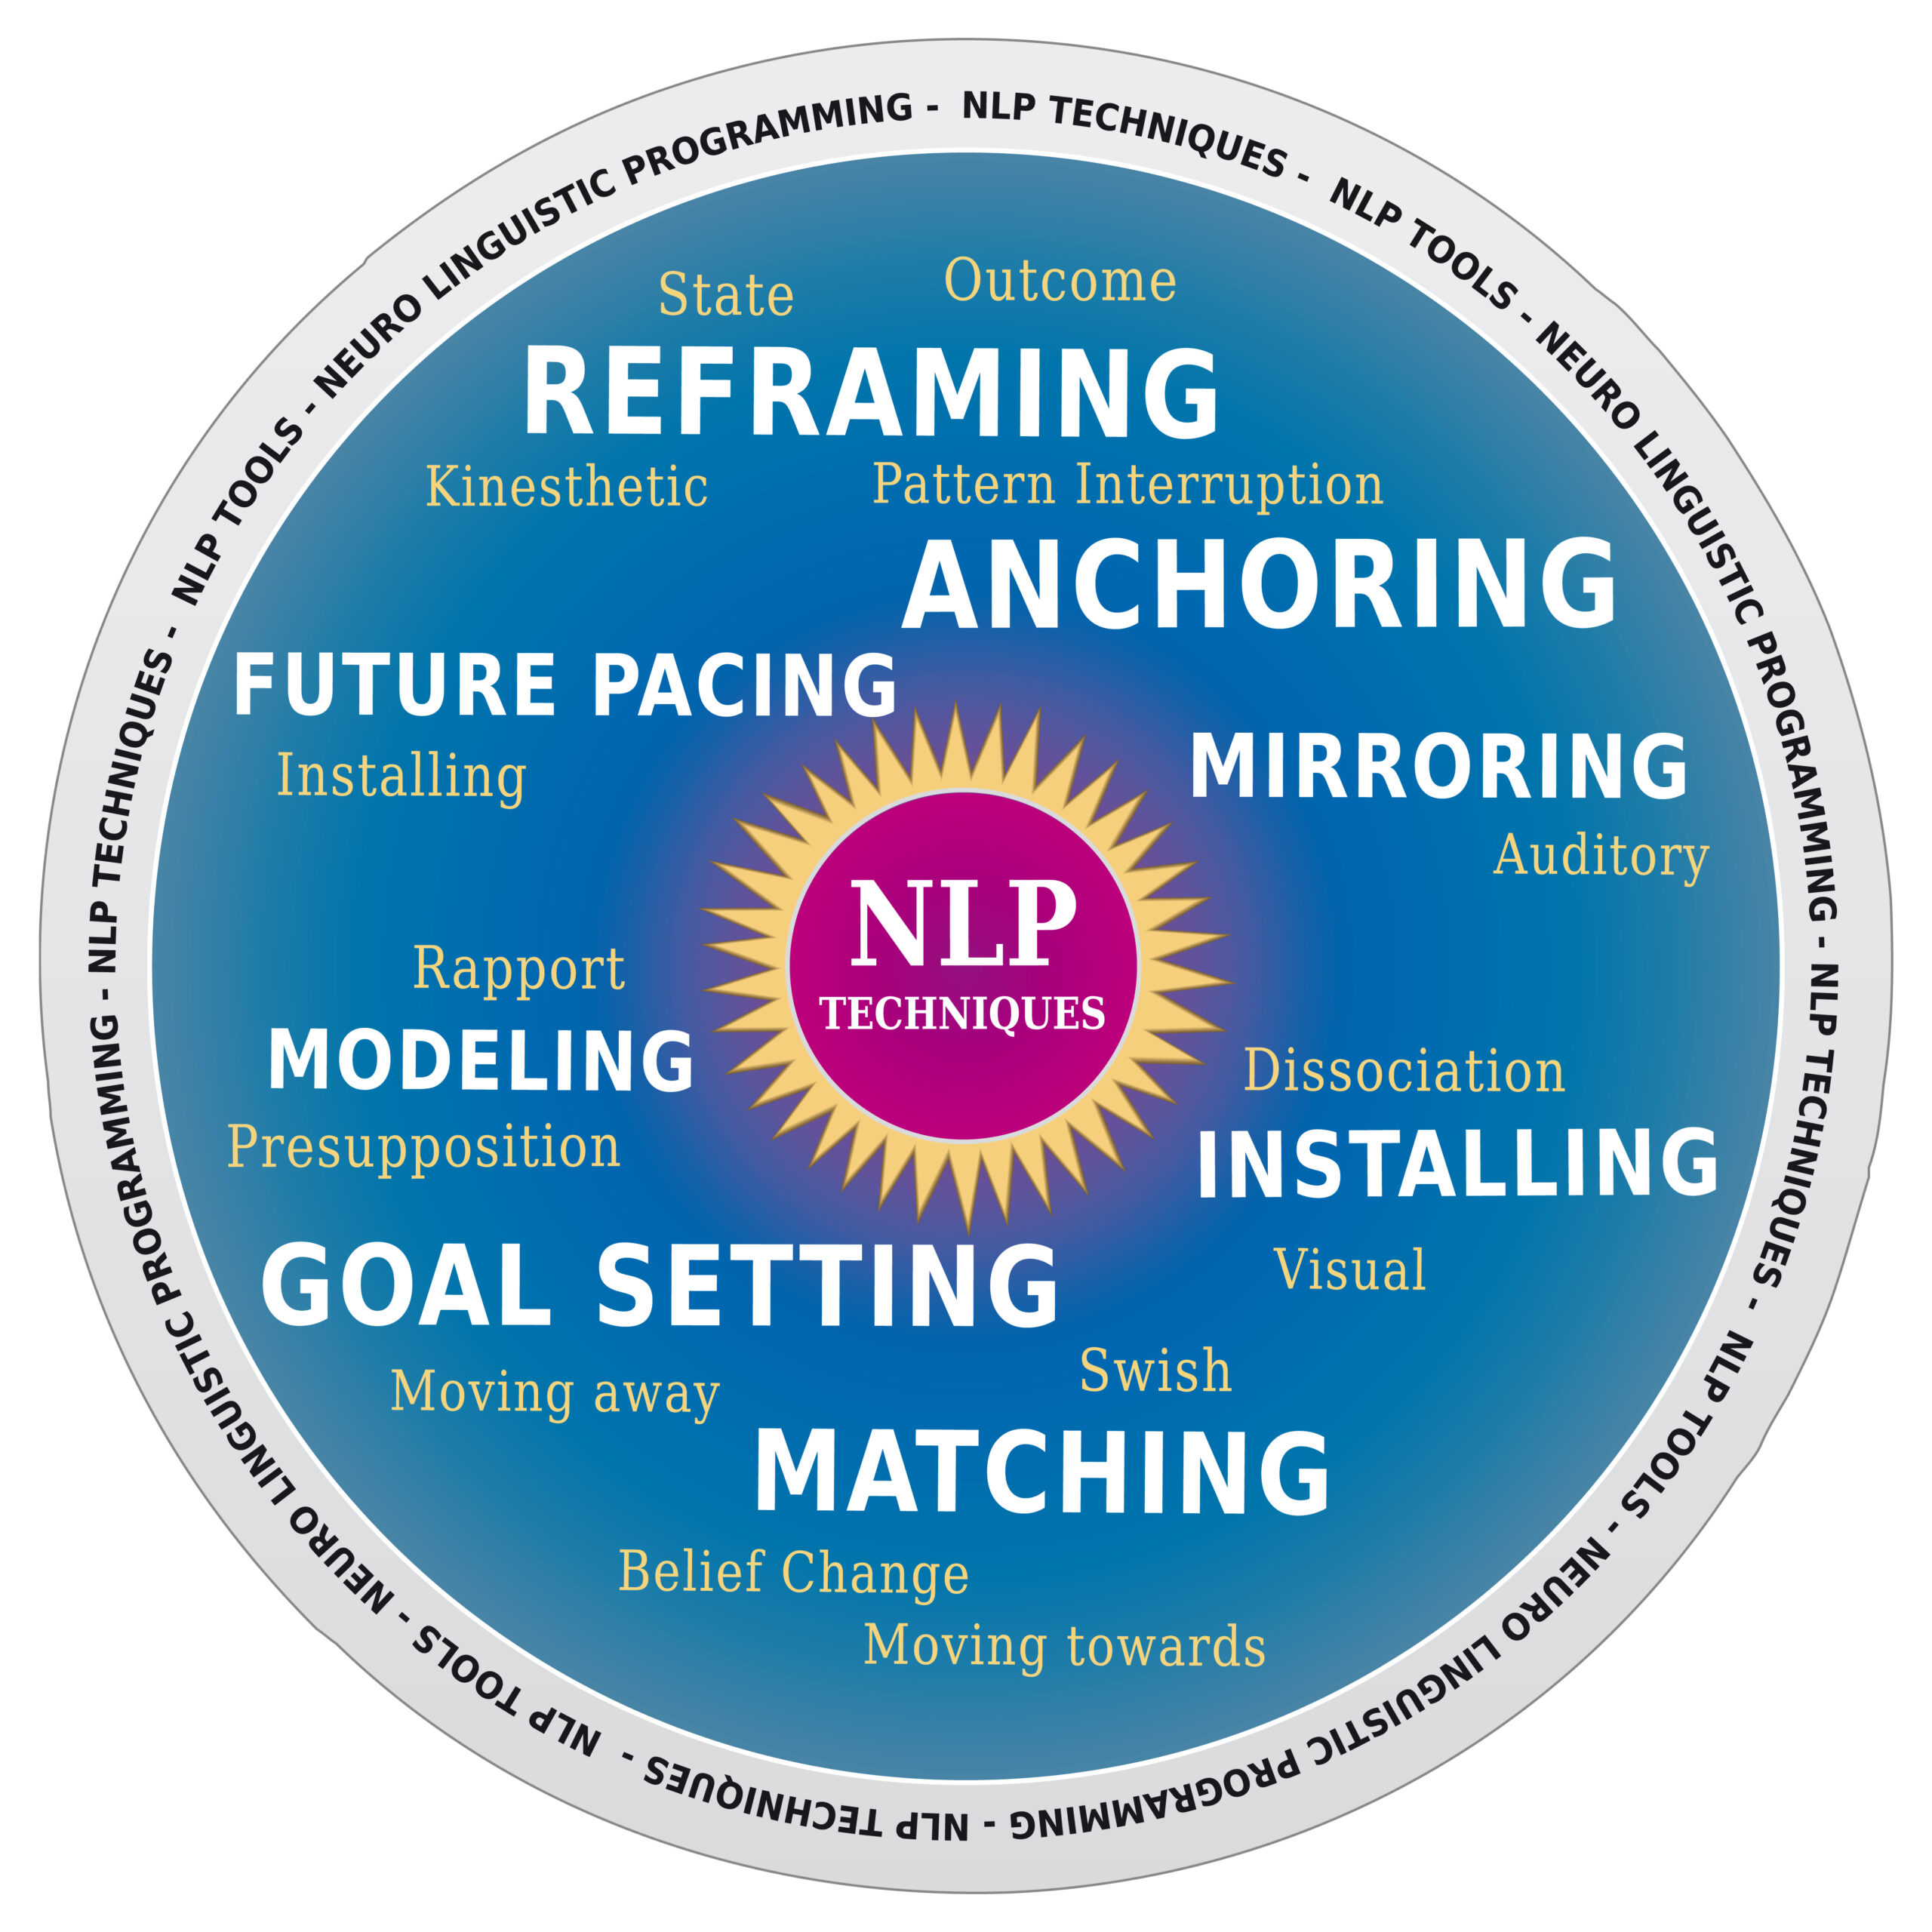 neuro-linguistic programming for self growth is a powerful tool to enact positive change